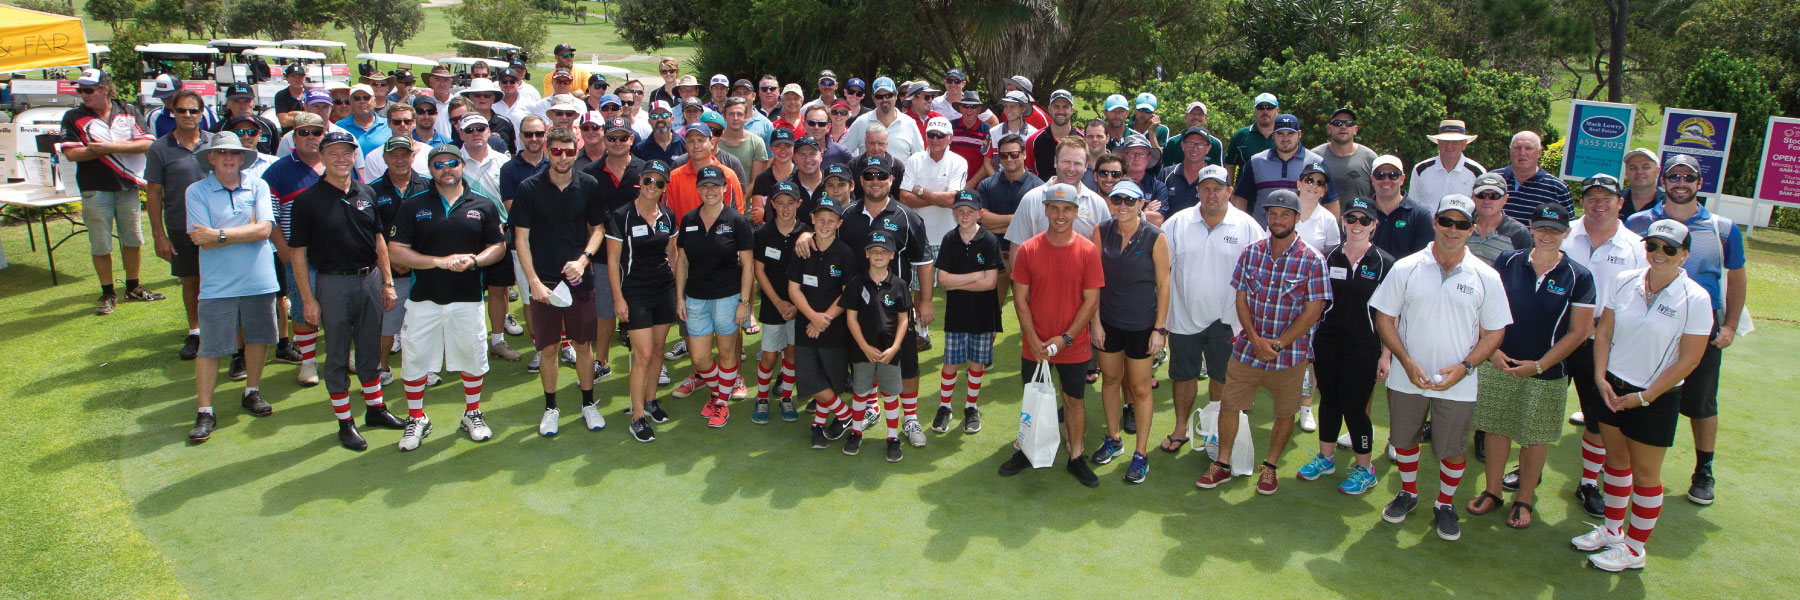 TJL Accountants Charity Golf Day Ronald McDonald House Family Retreat Forster NSW